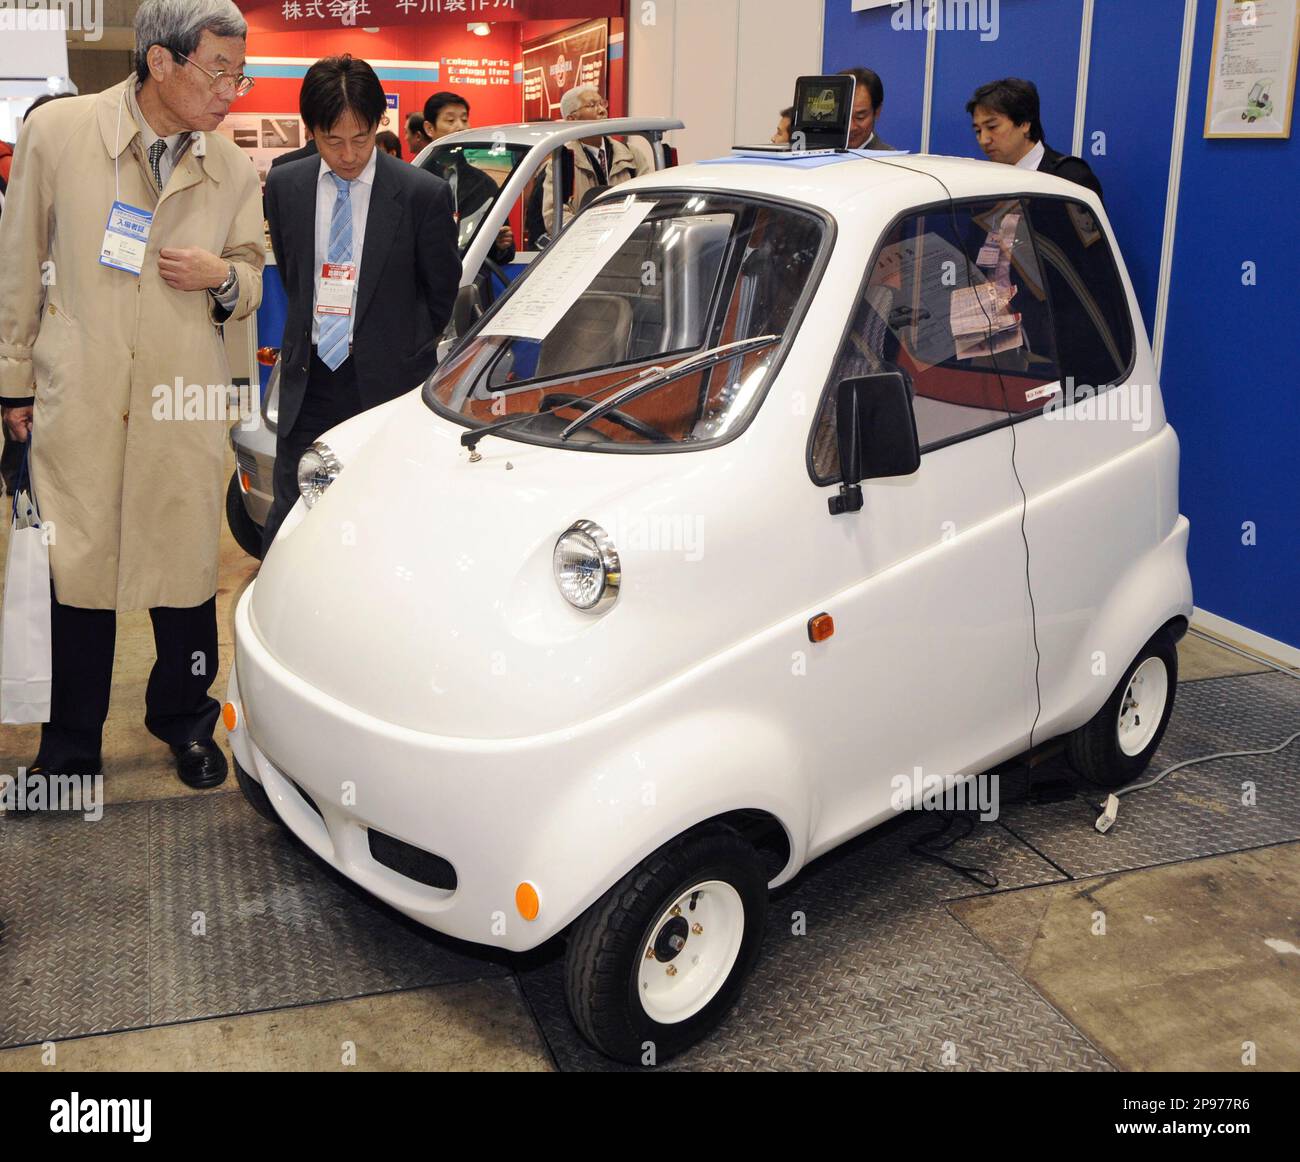 Visitors look at Japanes car maker Takeoka Auto Craft's electric  single-seater during a car electronics technology exhibition in Tokyo  Wednesday, Jan. 28, 2009. The ultra compact vehicle that runs at top speed